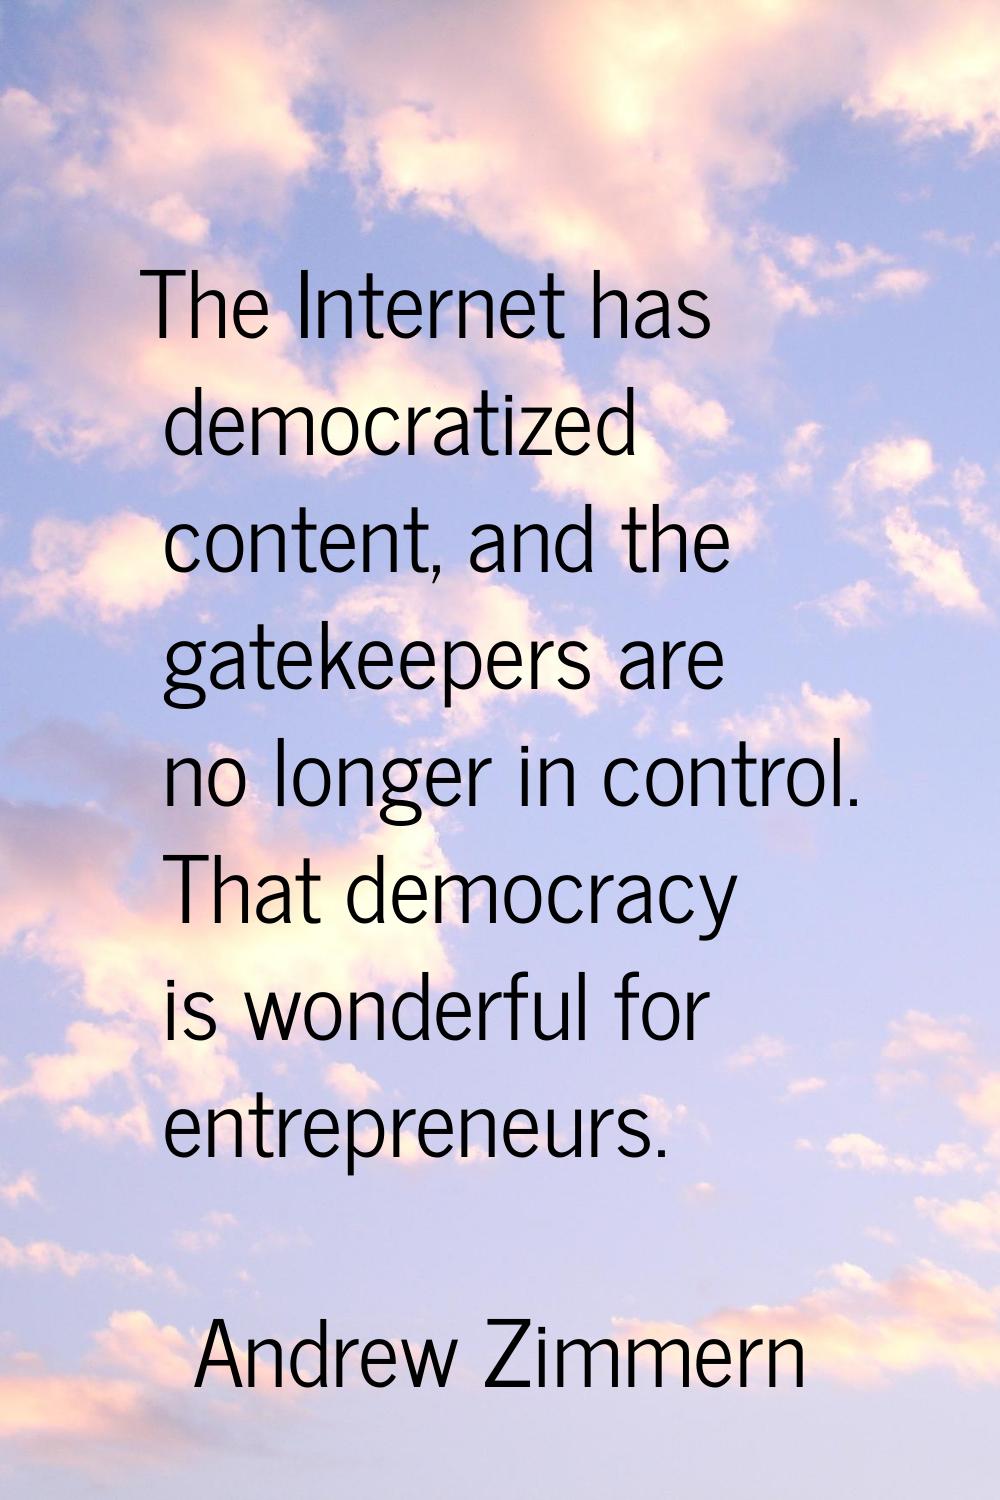 The Internet has democratized content, and the gatekeepers are no longer in control. That democracy